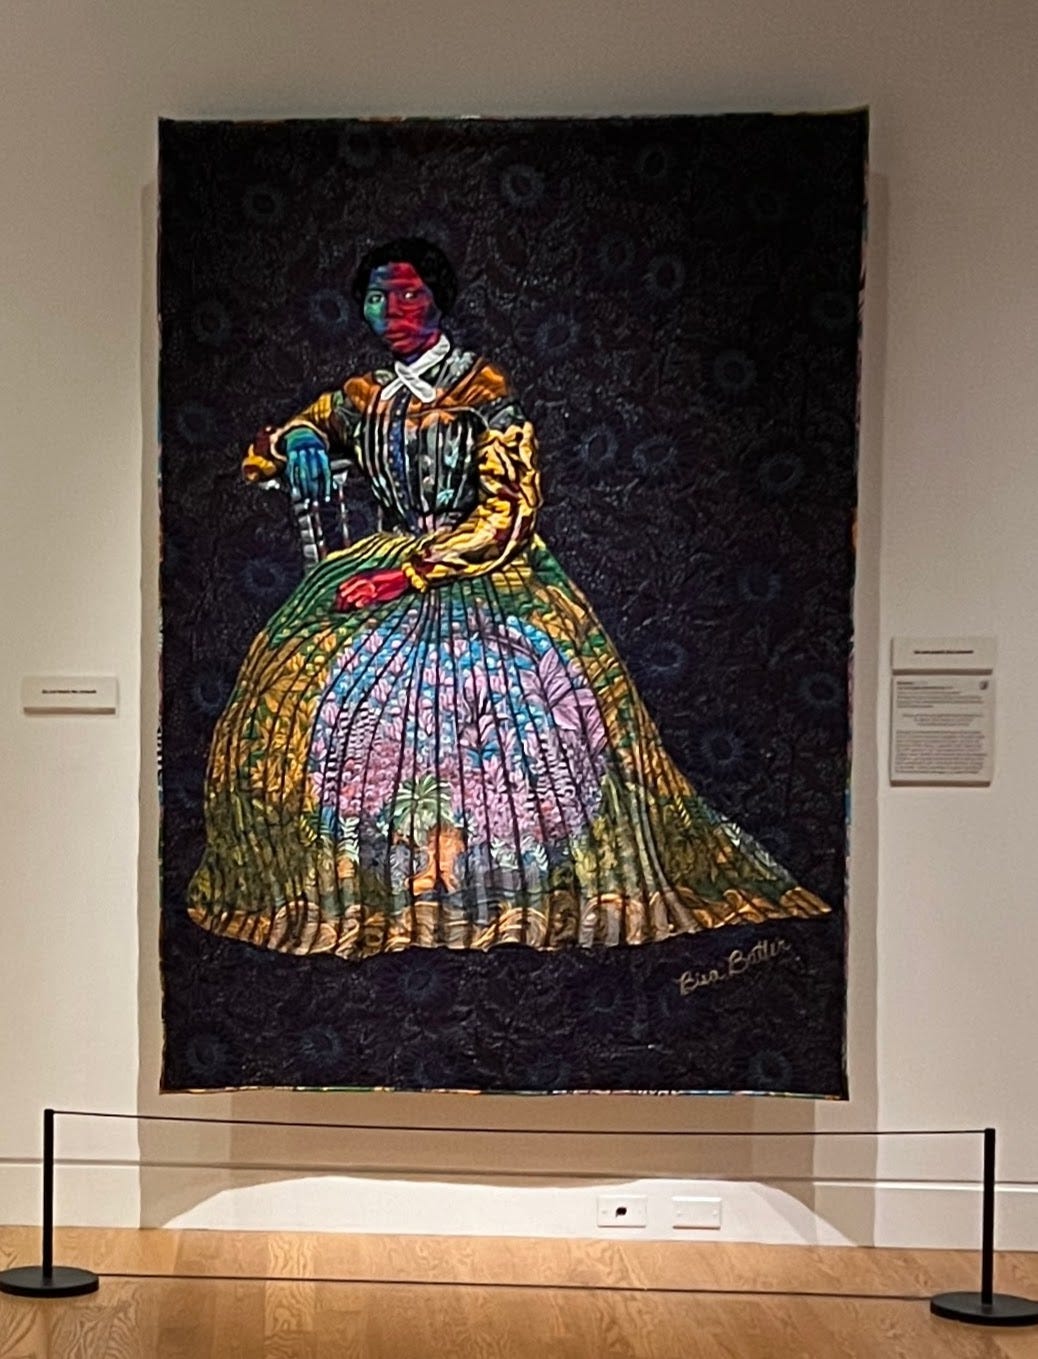 An image of Harriet Tubman depicted using brightly colored quilted cloth.